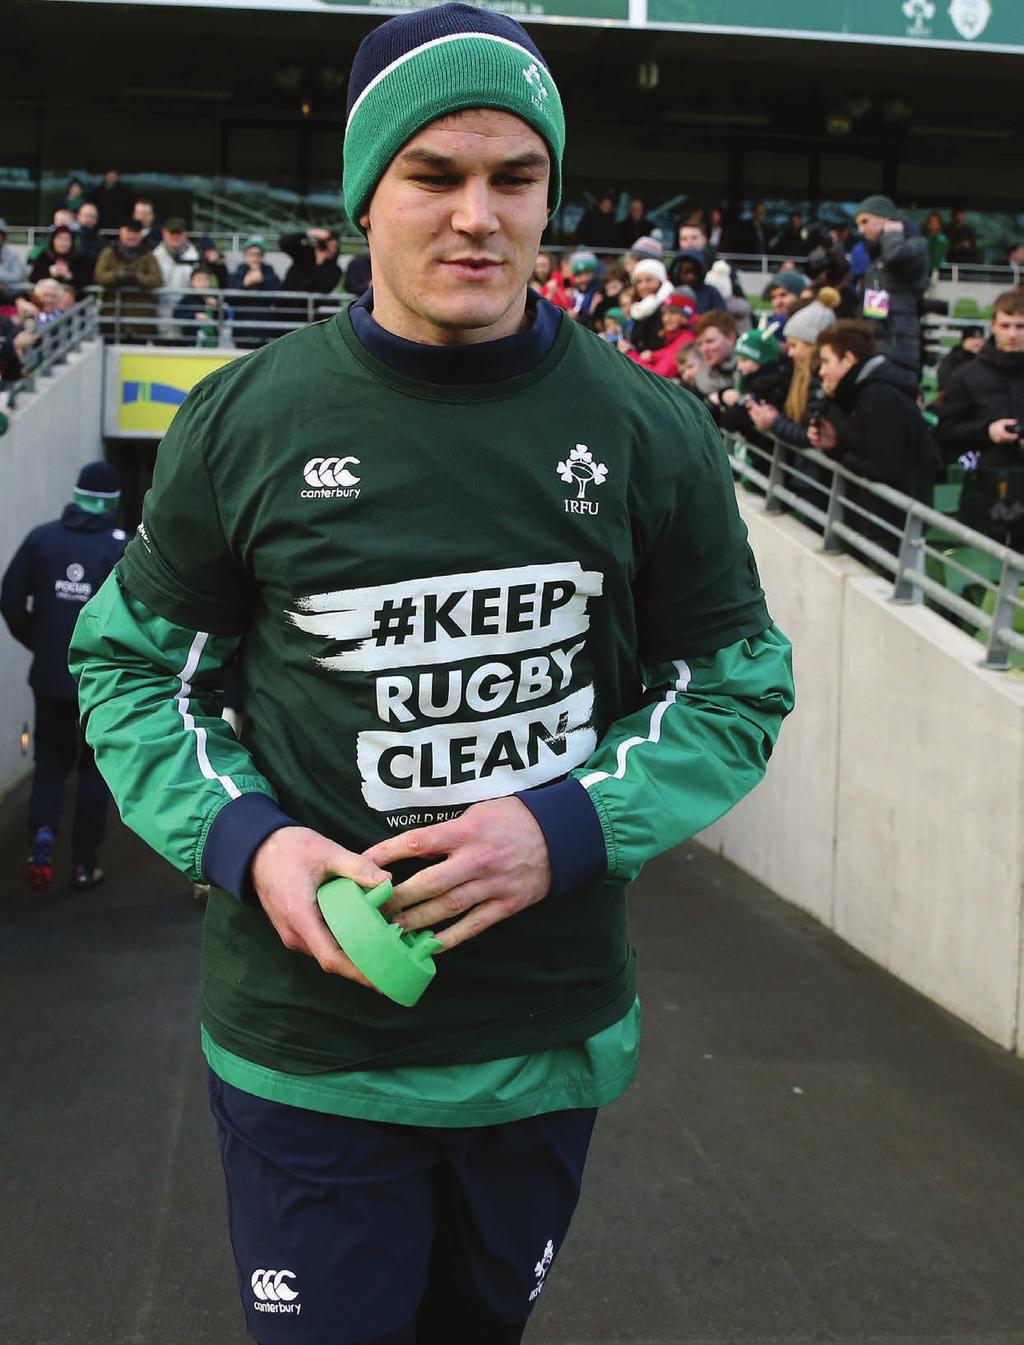 RULES www.irishsportscouncil.ie/anti-doping/ 2015-Anti-Doping-Rules WADA PROHIBITED LIST list.wada-ama.org WORLD RUGBY RESOURCE keeprugbyclean.worldrugby.